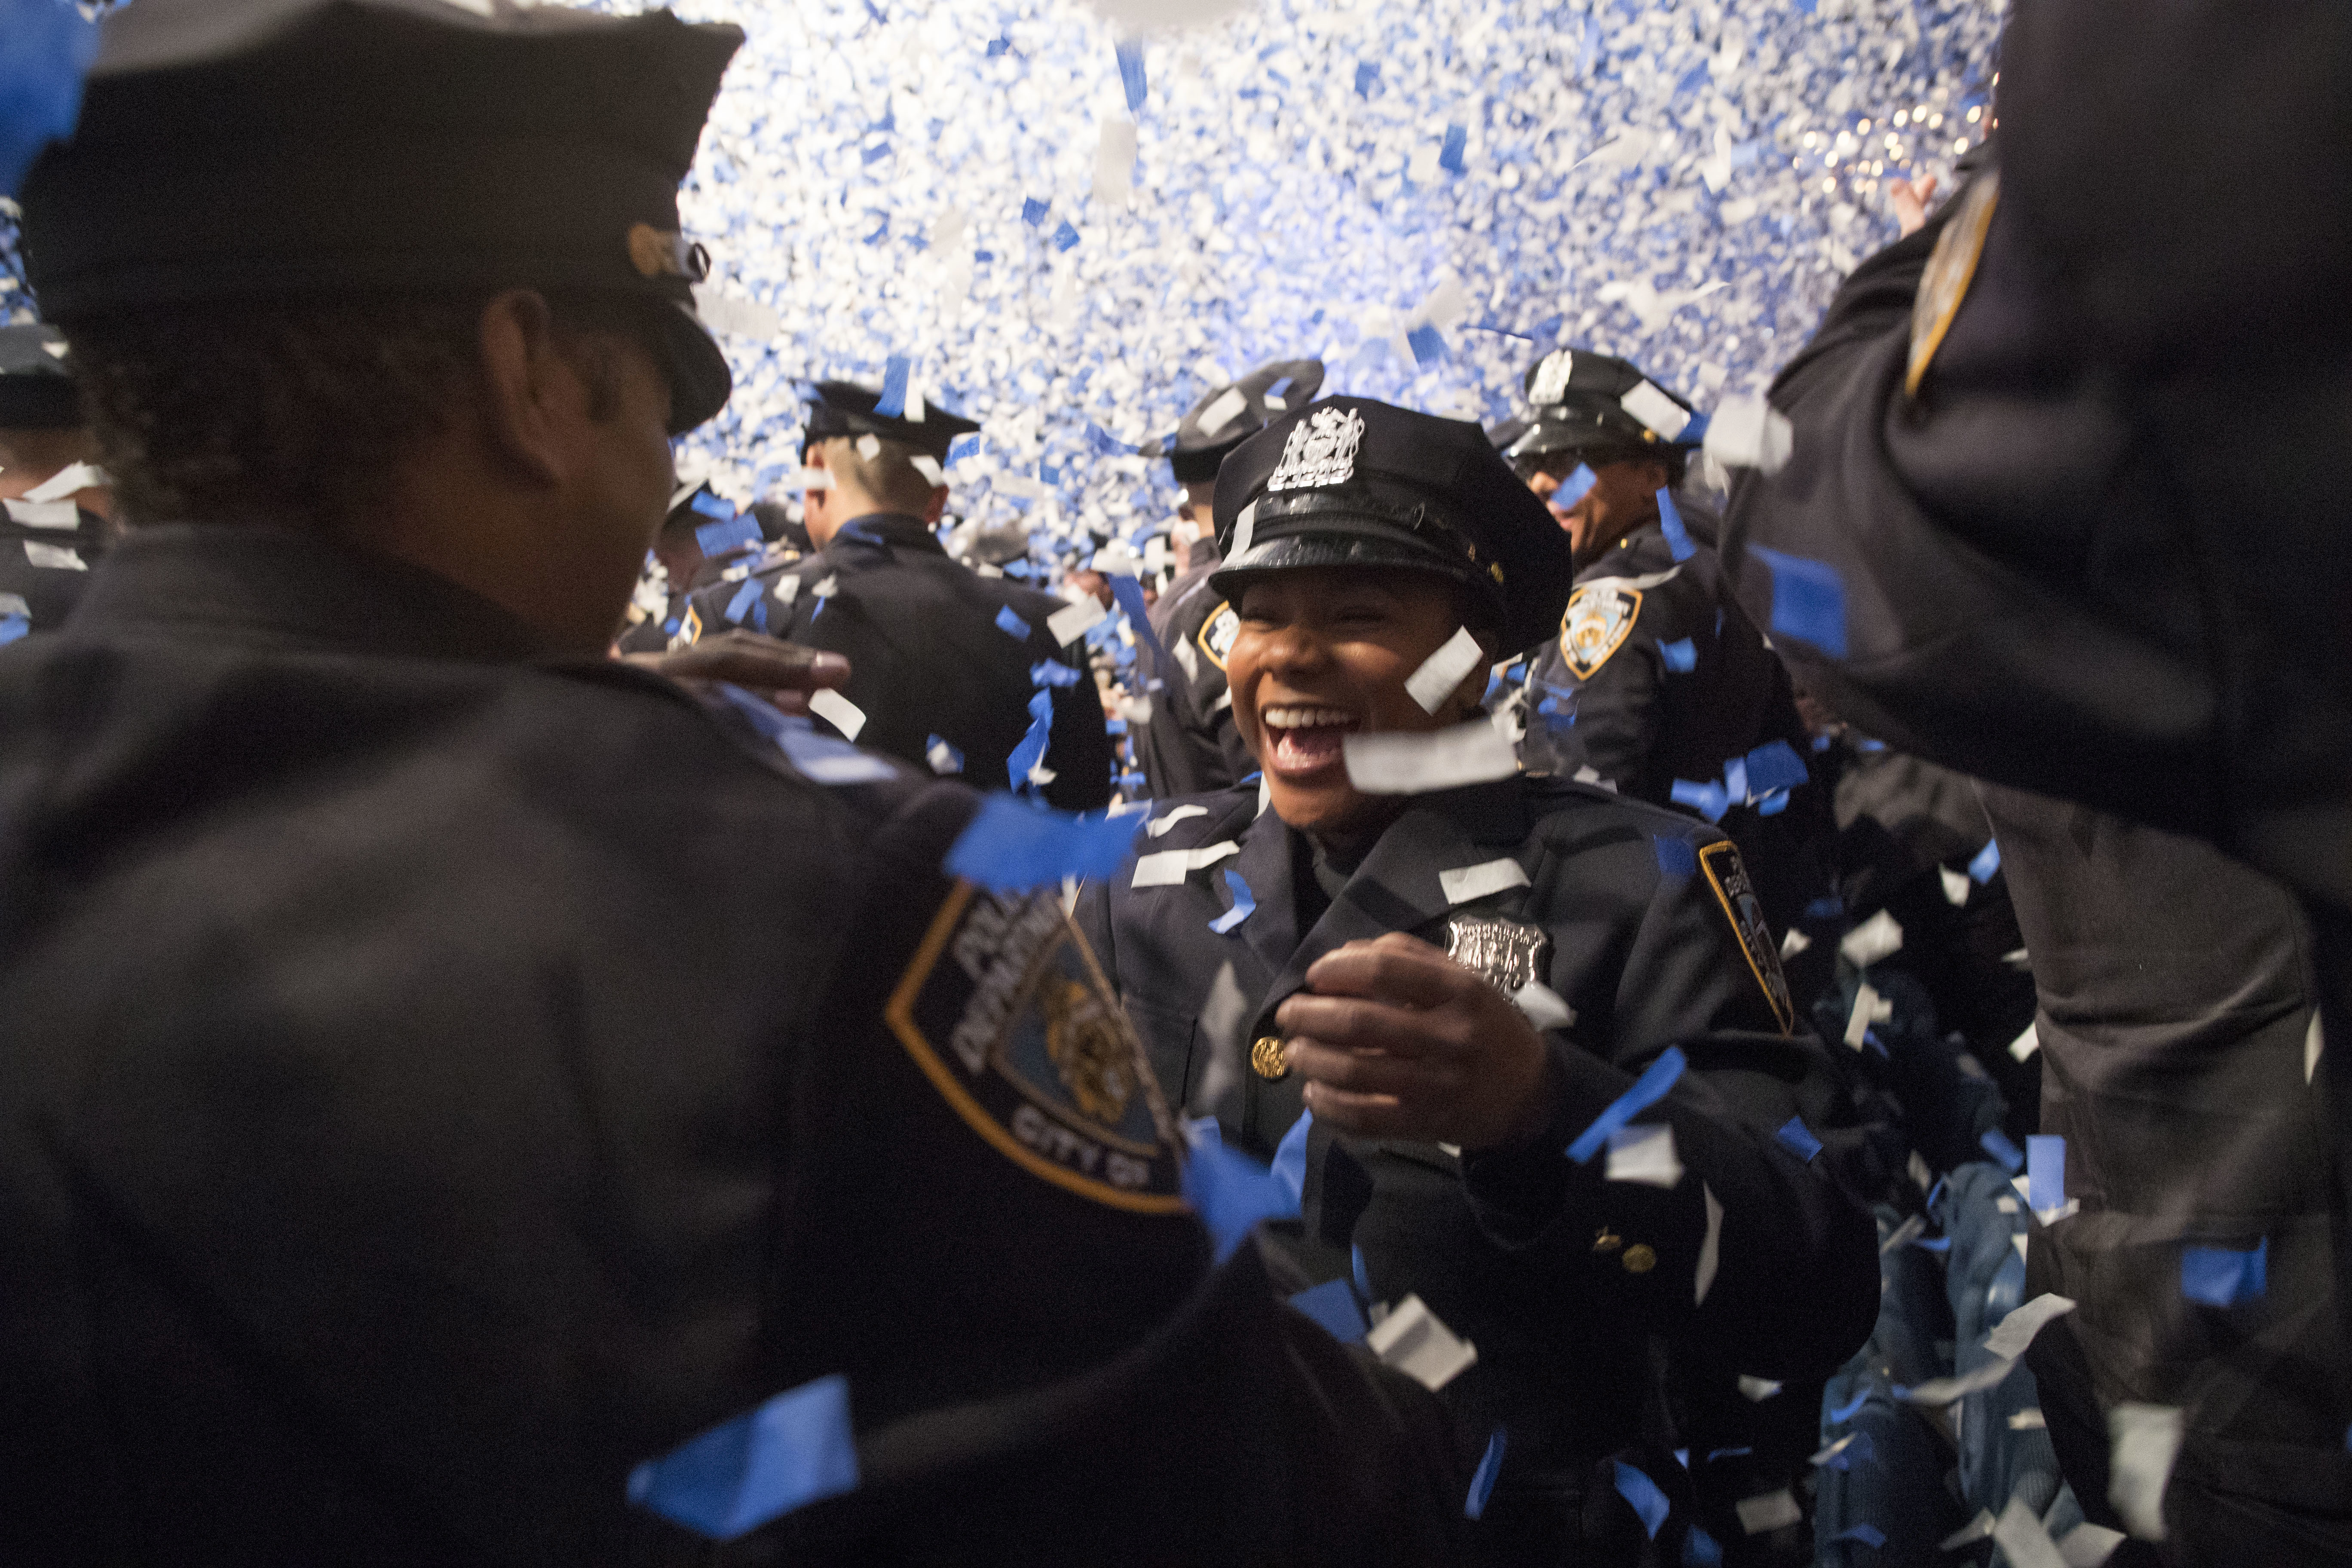 The newest members of the New York City police officers hug during their graduation ceremony, Thursday, March 30, 2017, in New York. Over 600 men and women took the oath of office and pledged to protect the people of New York City. (AP Photo/Mary Altaffer)